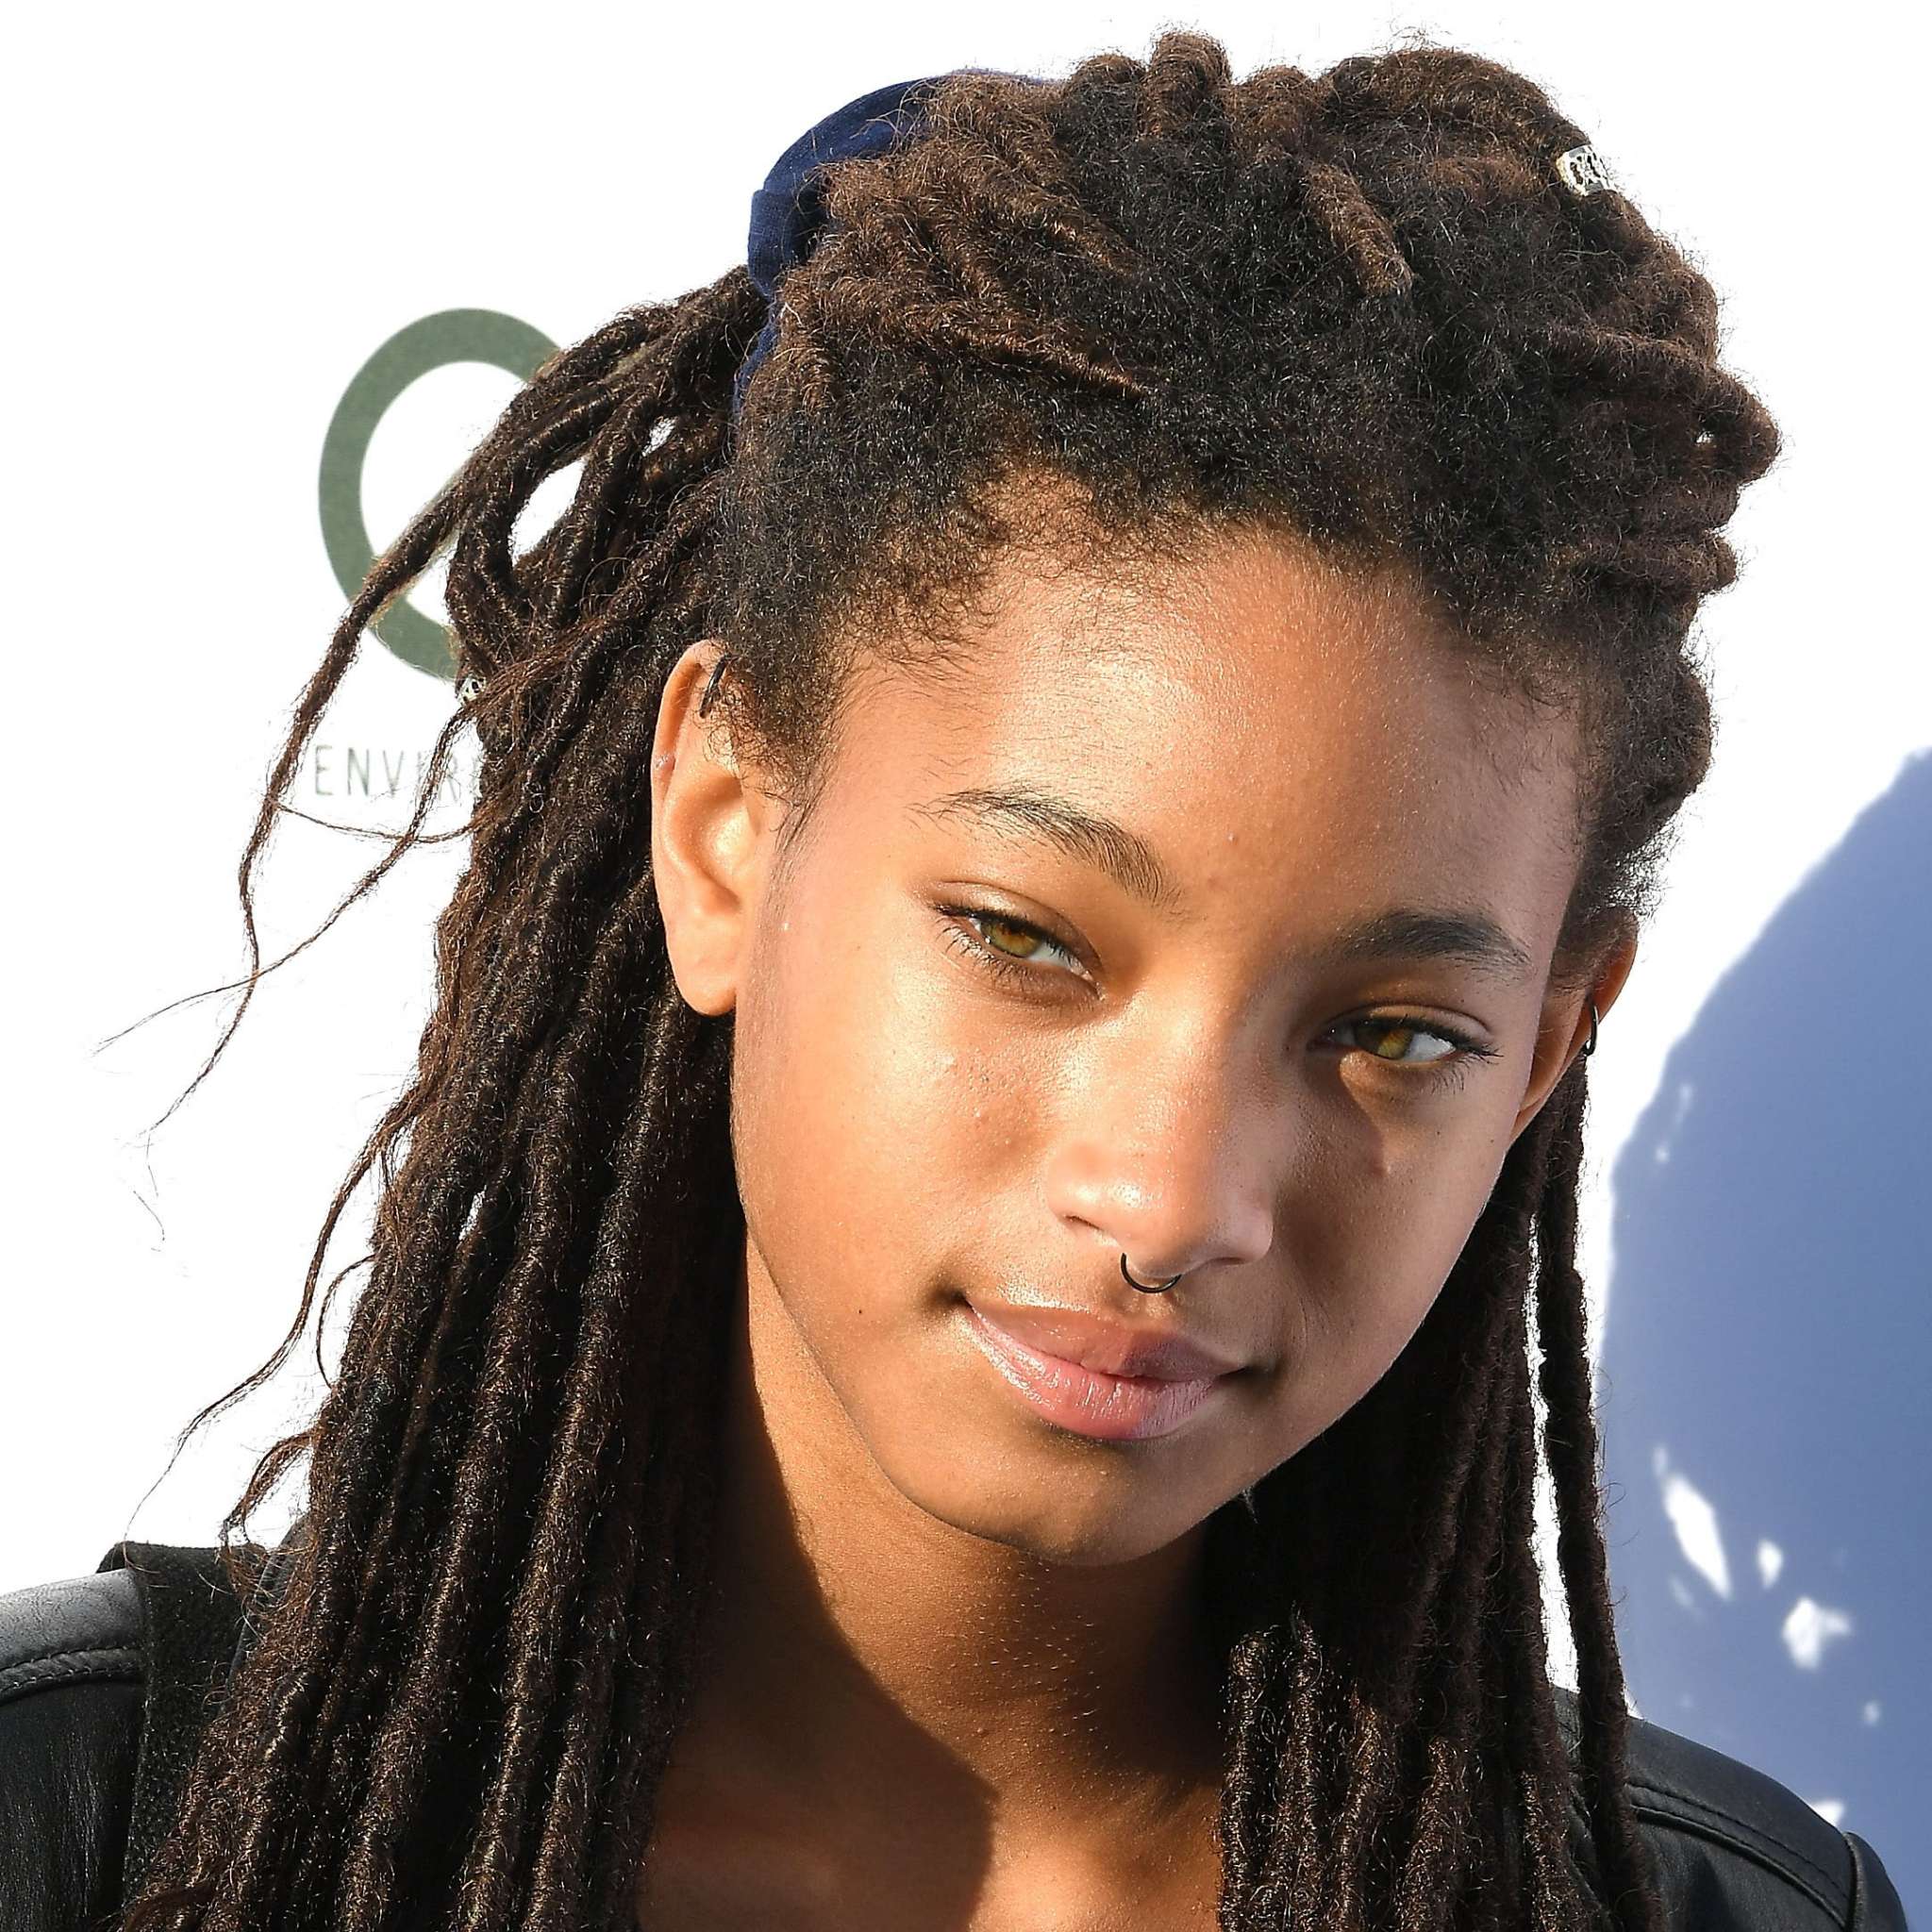 ”gabrielle-union-praises-willow-check-out-the-emotional-message”